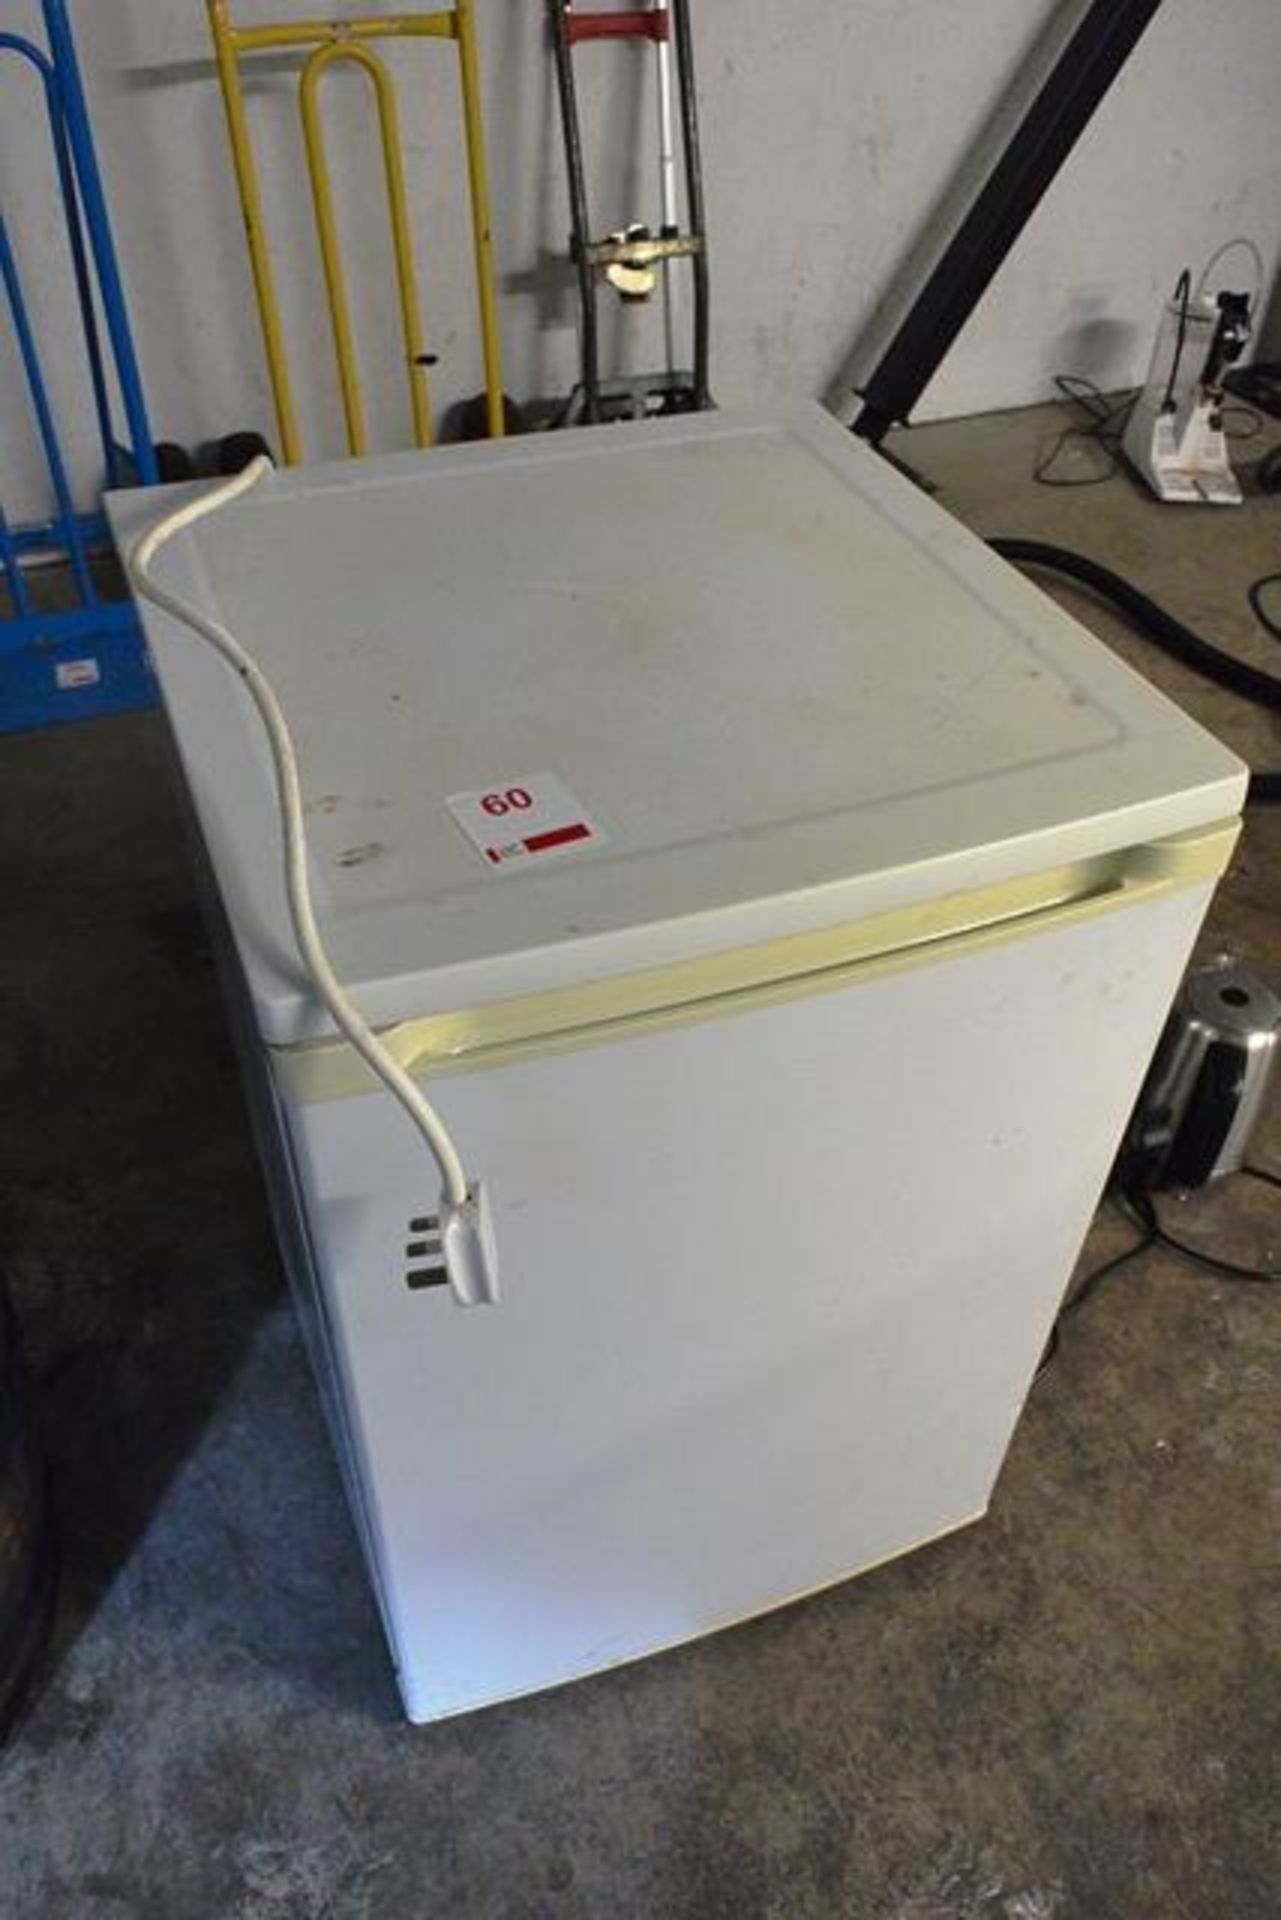 Curry's Essentials freezer, model CUF55W12. This Lot is Located: Black Tor Brewery, Units 5 & 6,